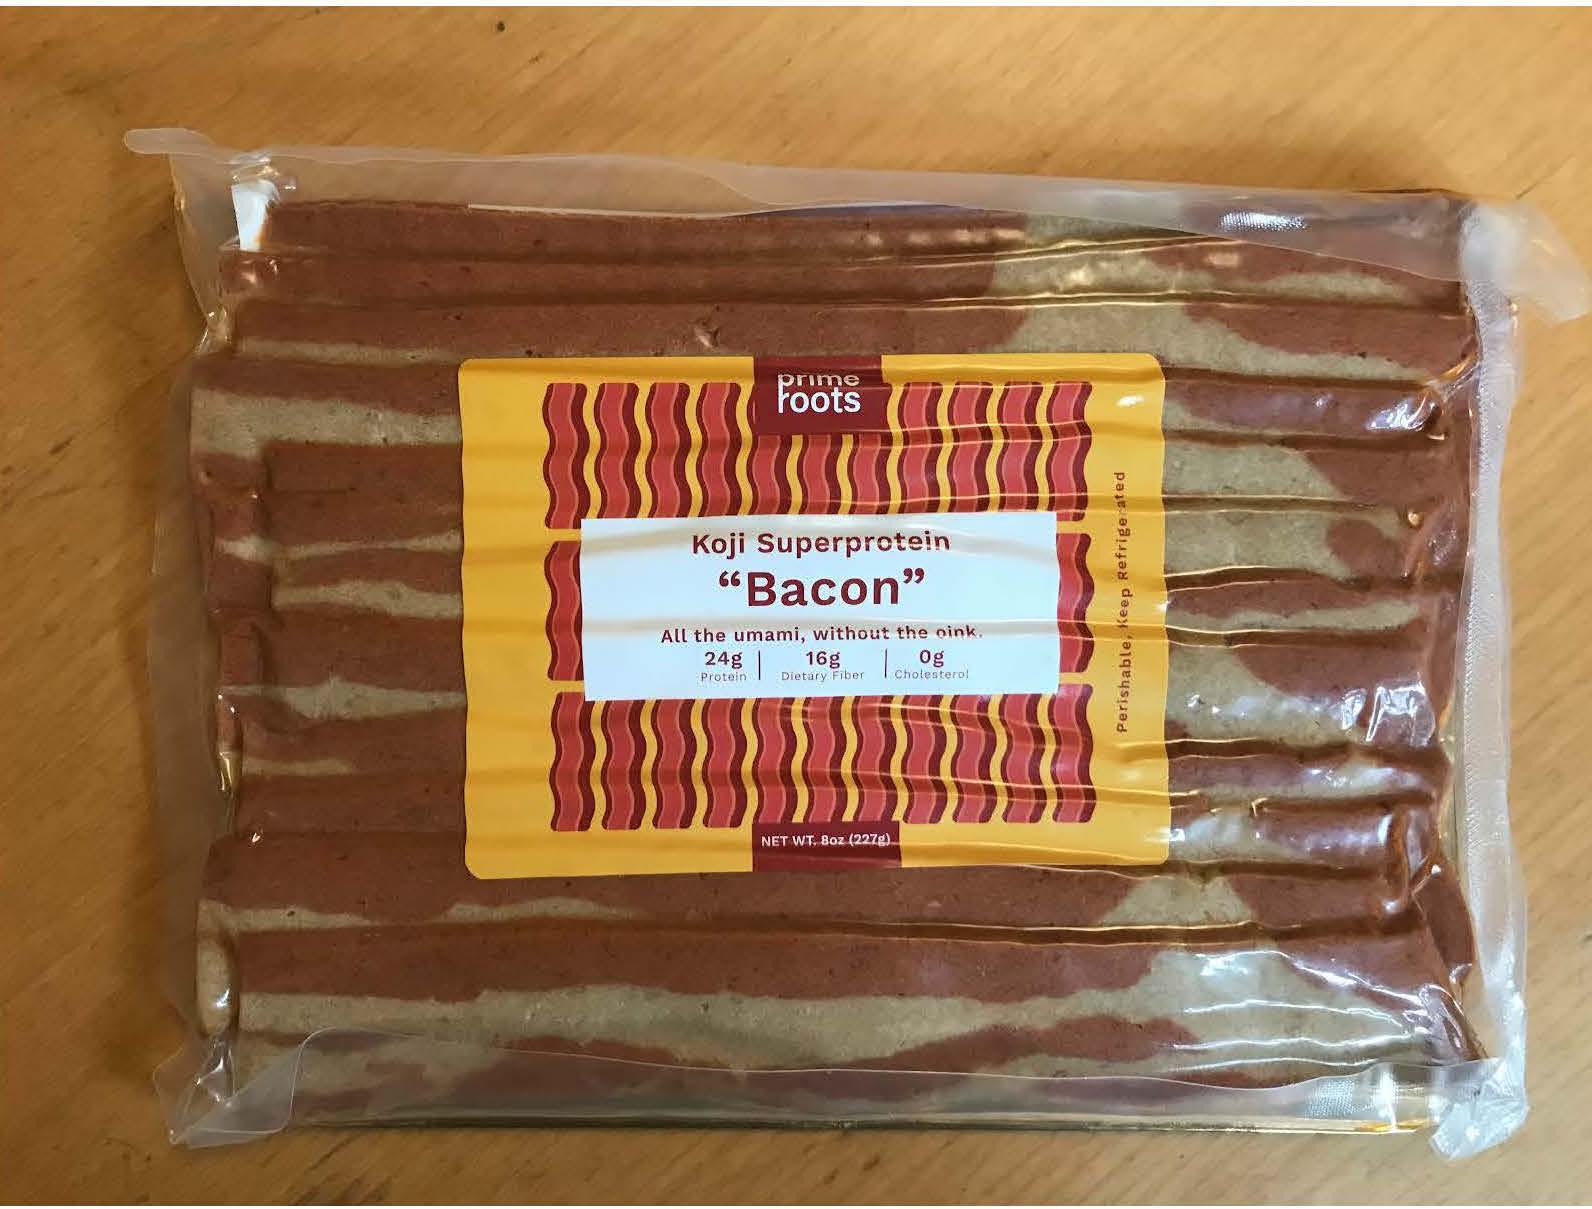 Bringing home the bacon: A kindergartner tests the future of food